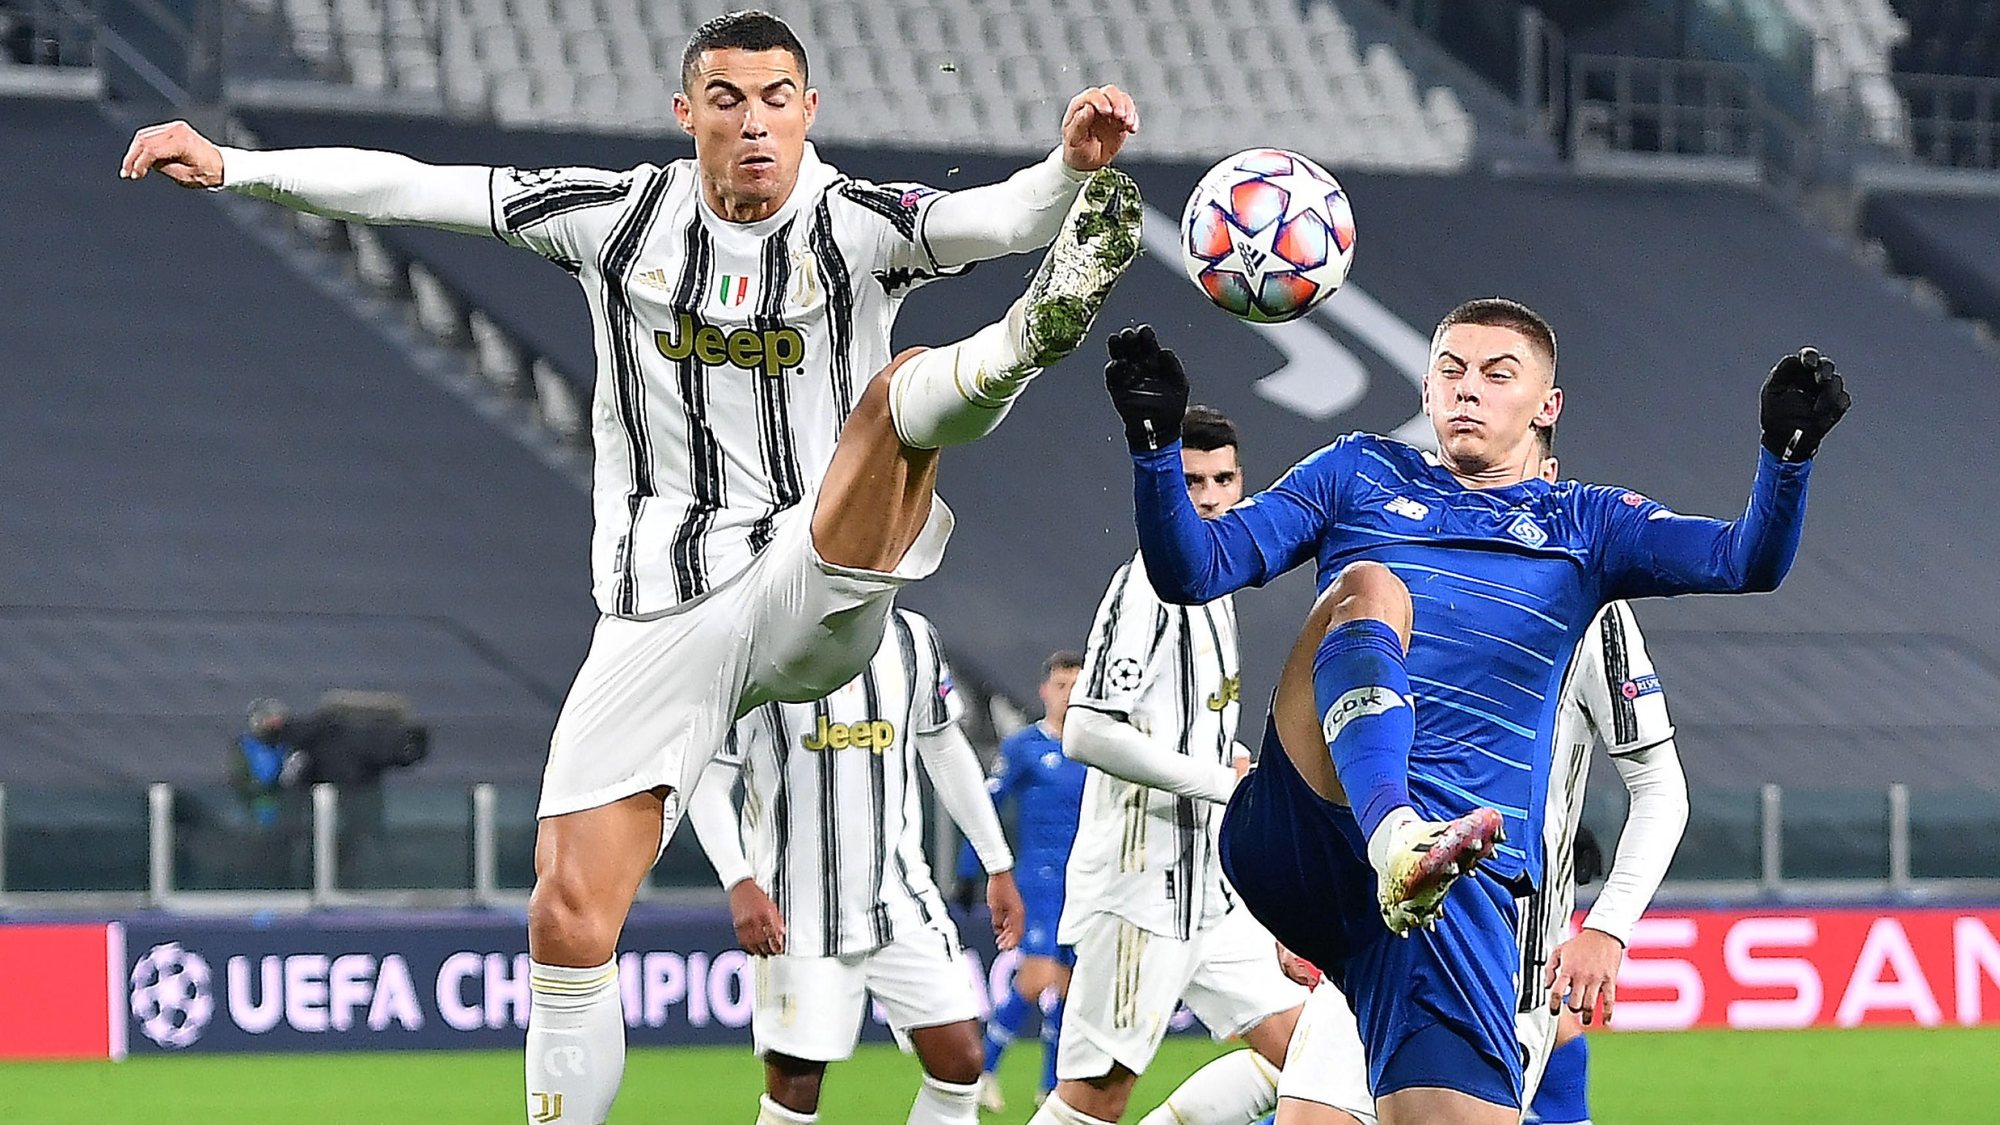 epa08858028 Juventusâ€™ Cristiano Ronaldo(L) in action during the UEFA Champions League Group G soccer match between Juventus FC vs FK Dynamo Kyiv at the Allianz Stadium in Turin, Italy, 2 December 2020.  EPA/ALESSANDRO DI MARCO